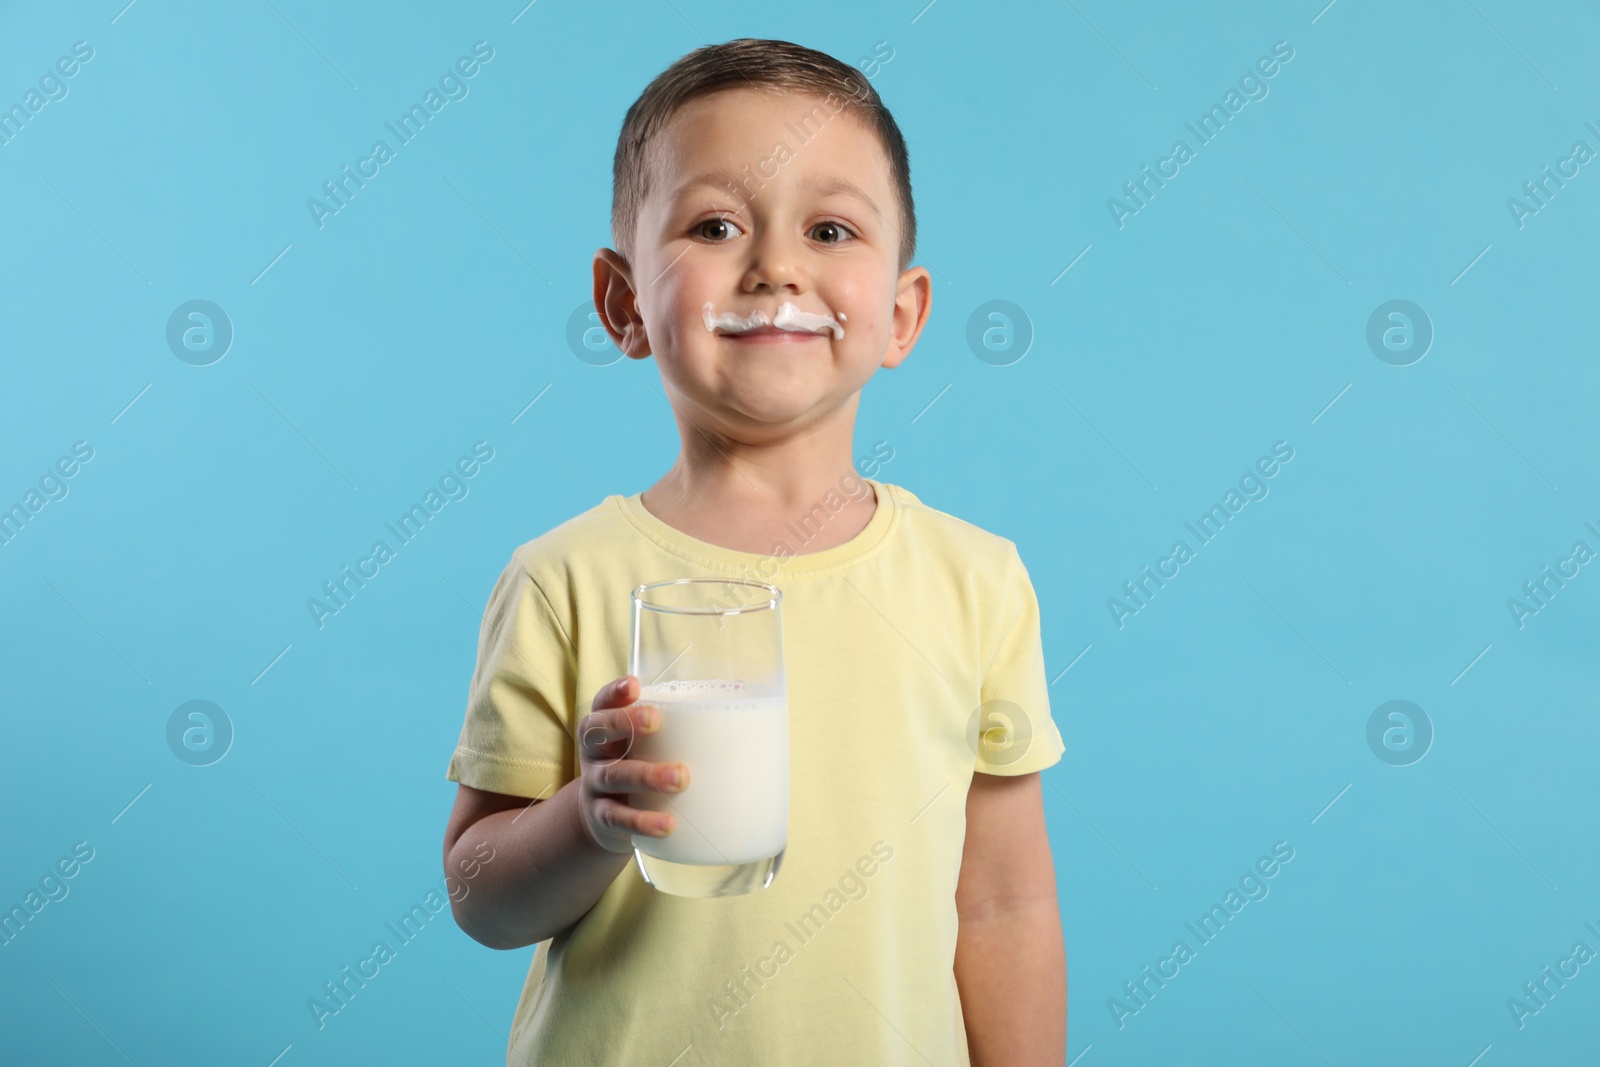 Photo of Cute boy with milk mustache holding glass of tasty dairy drink on light blue background